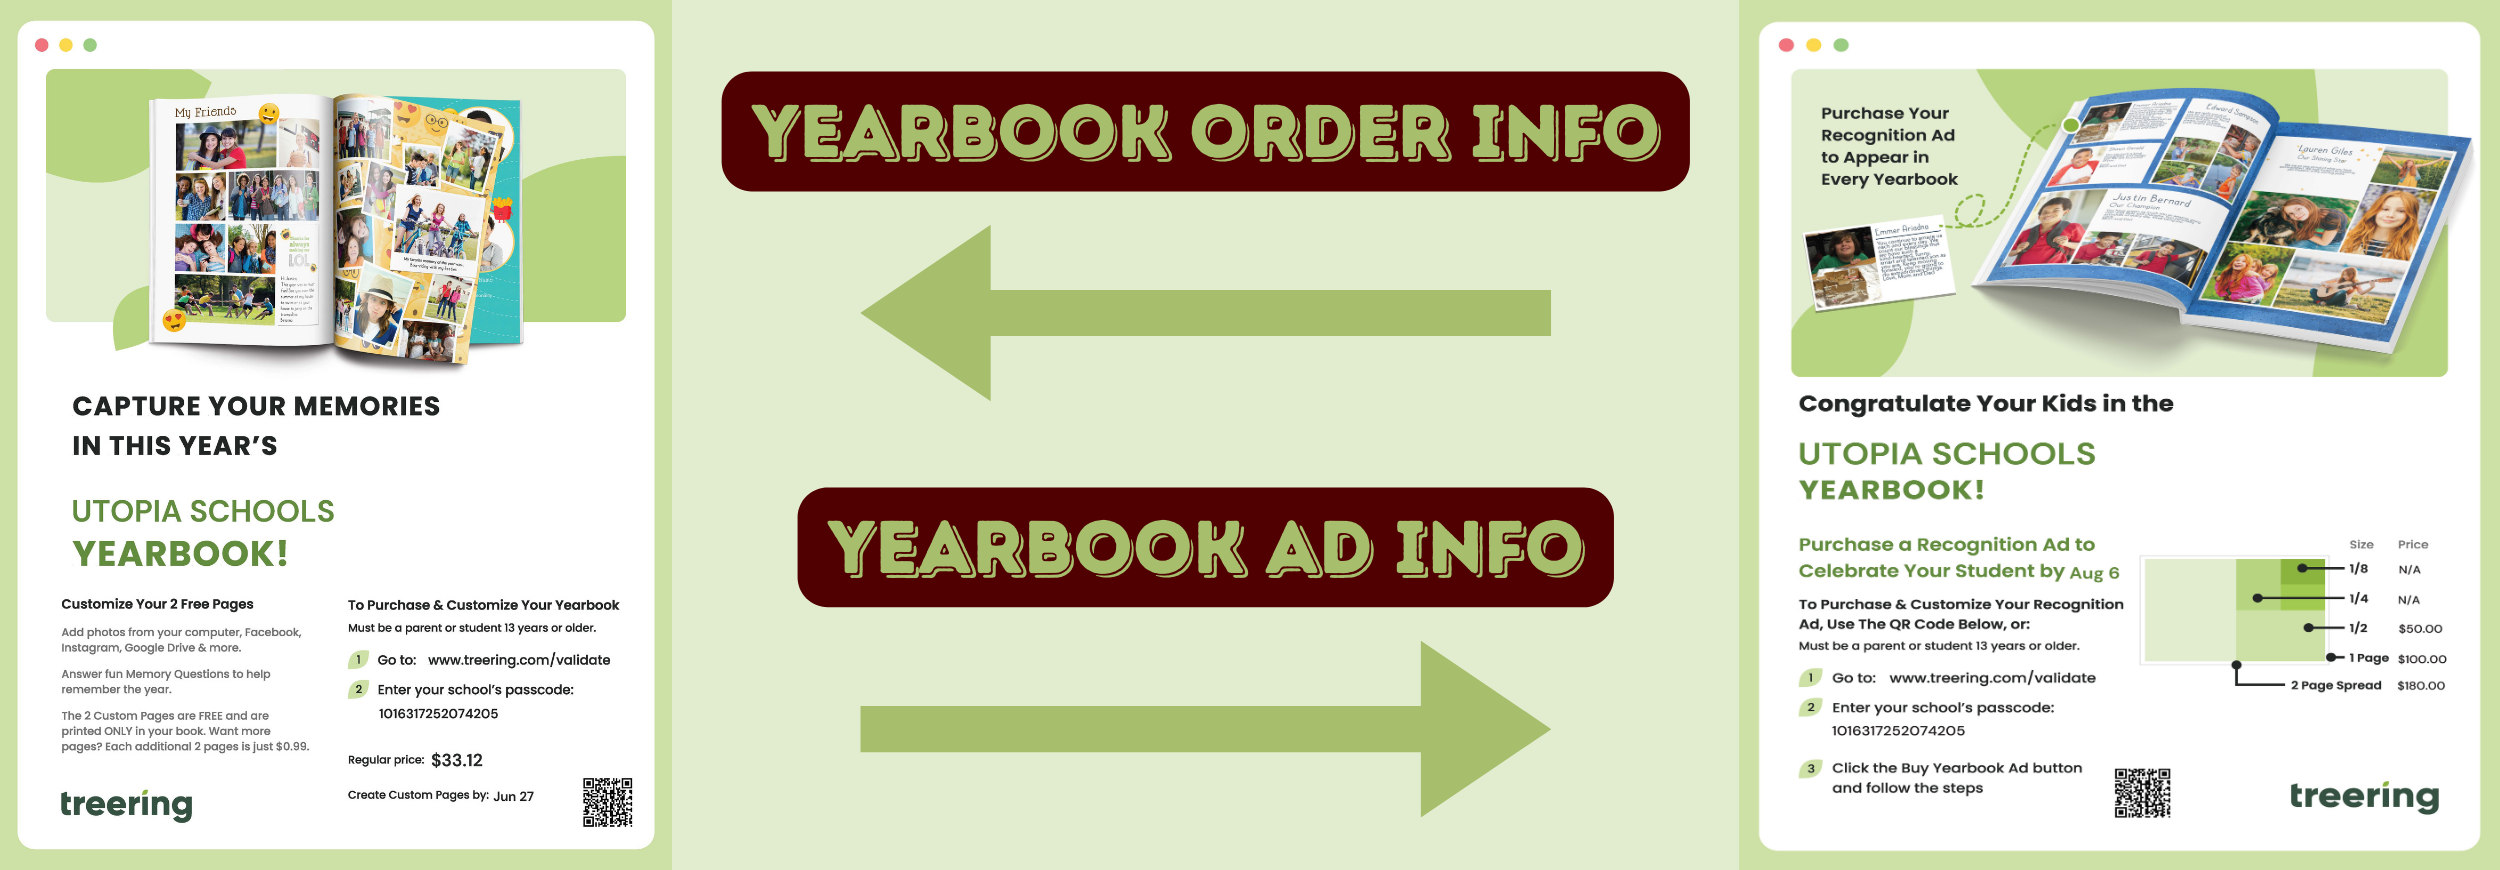 Yearbook ordering and ad information. Click for details.